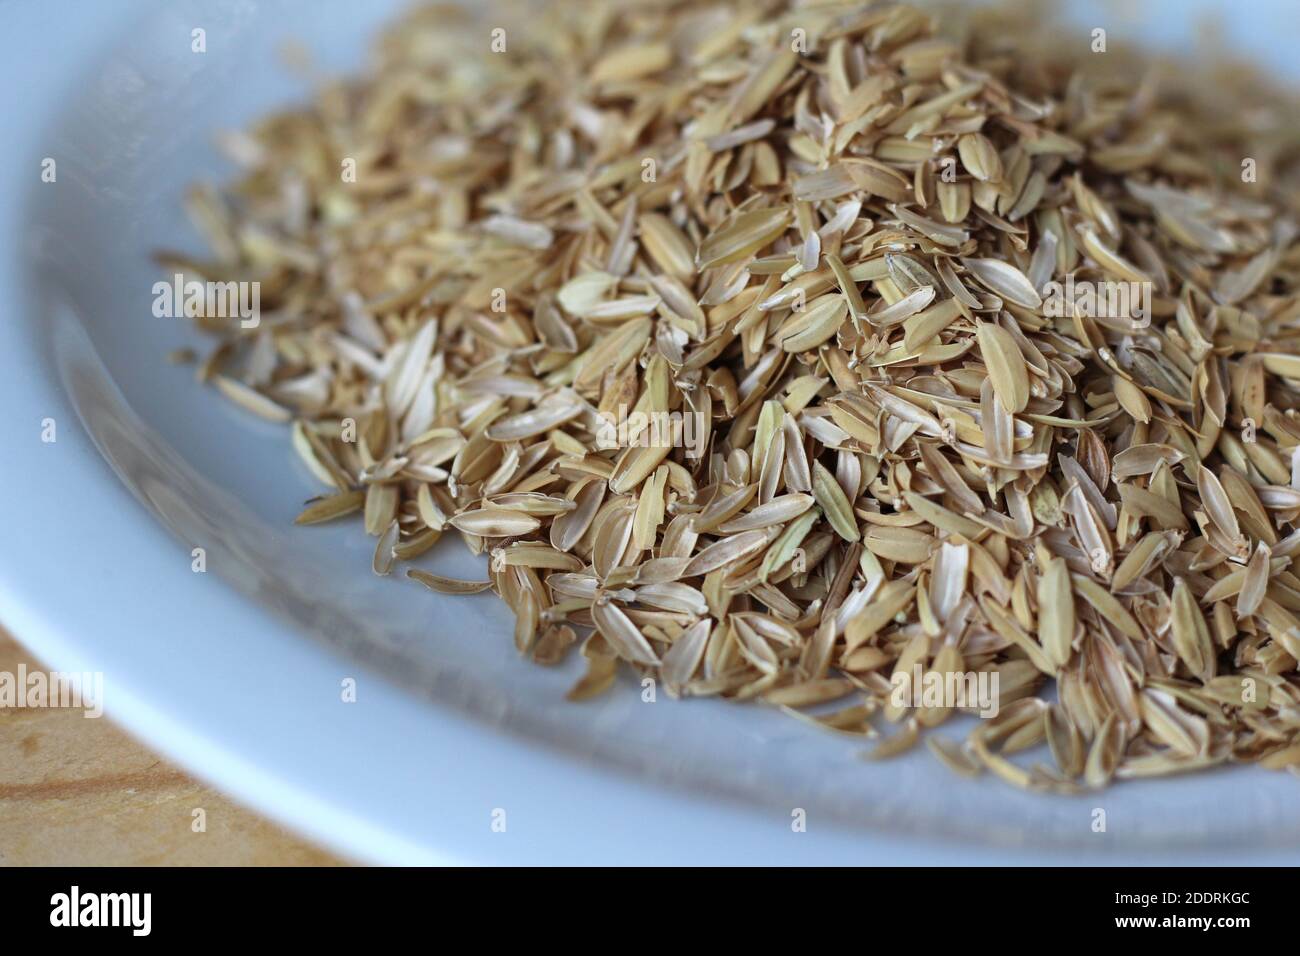 A pile of rice hulls (husks) in close up on a white plate on a wooden table. Husks are a waste product which can be reused in compost making and as a Stock Photo